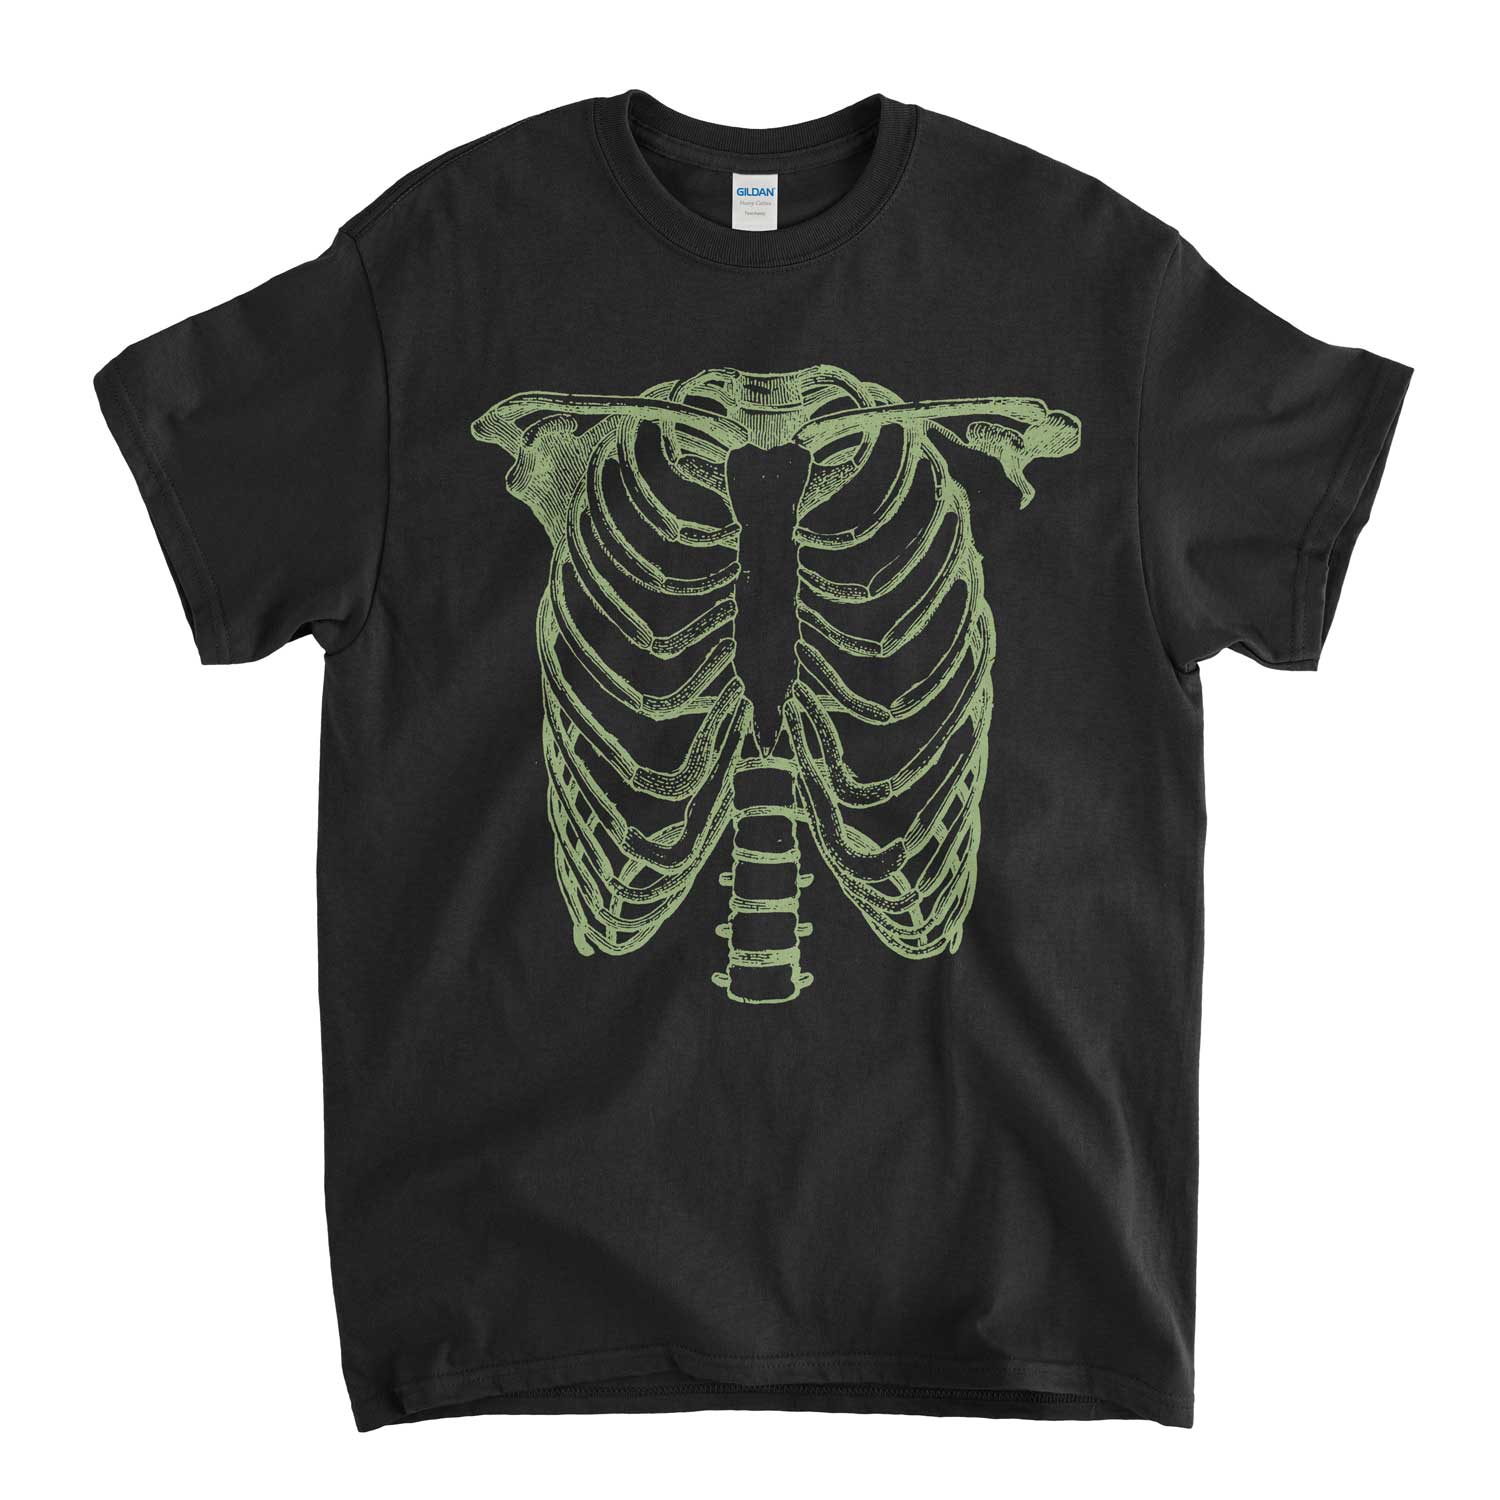 As Worn By Nigel Tufnell - Ribcage T Shirt Spinal Tap